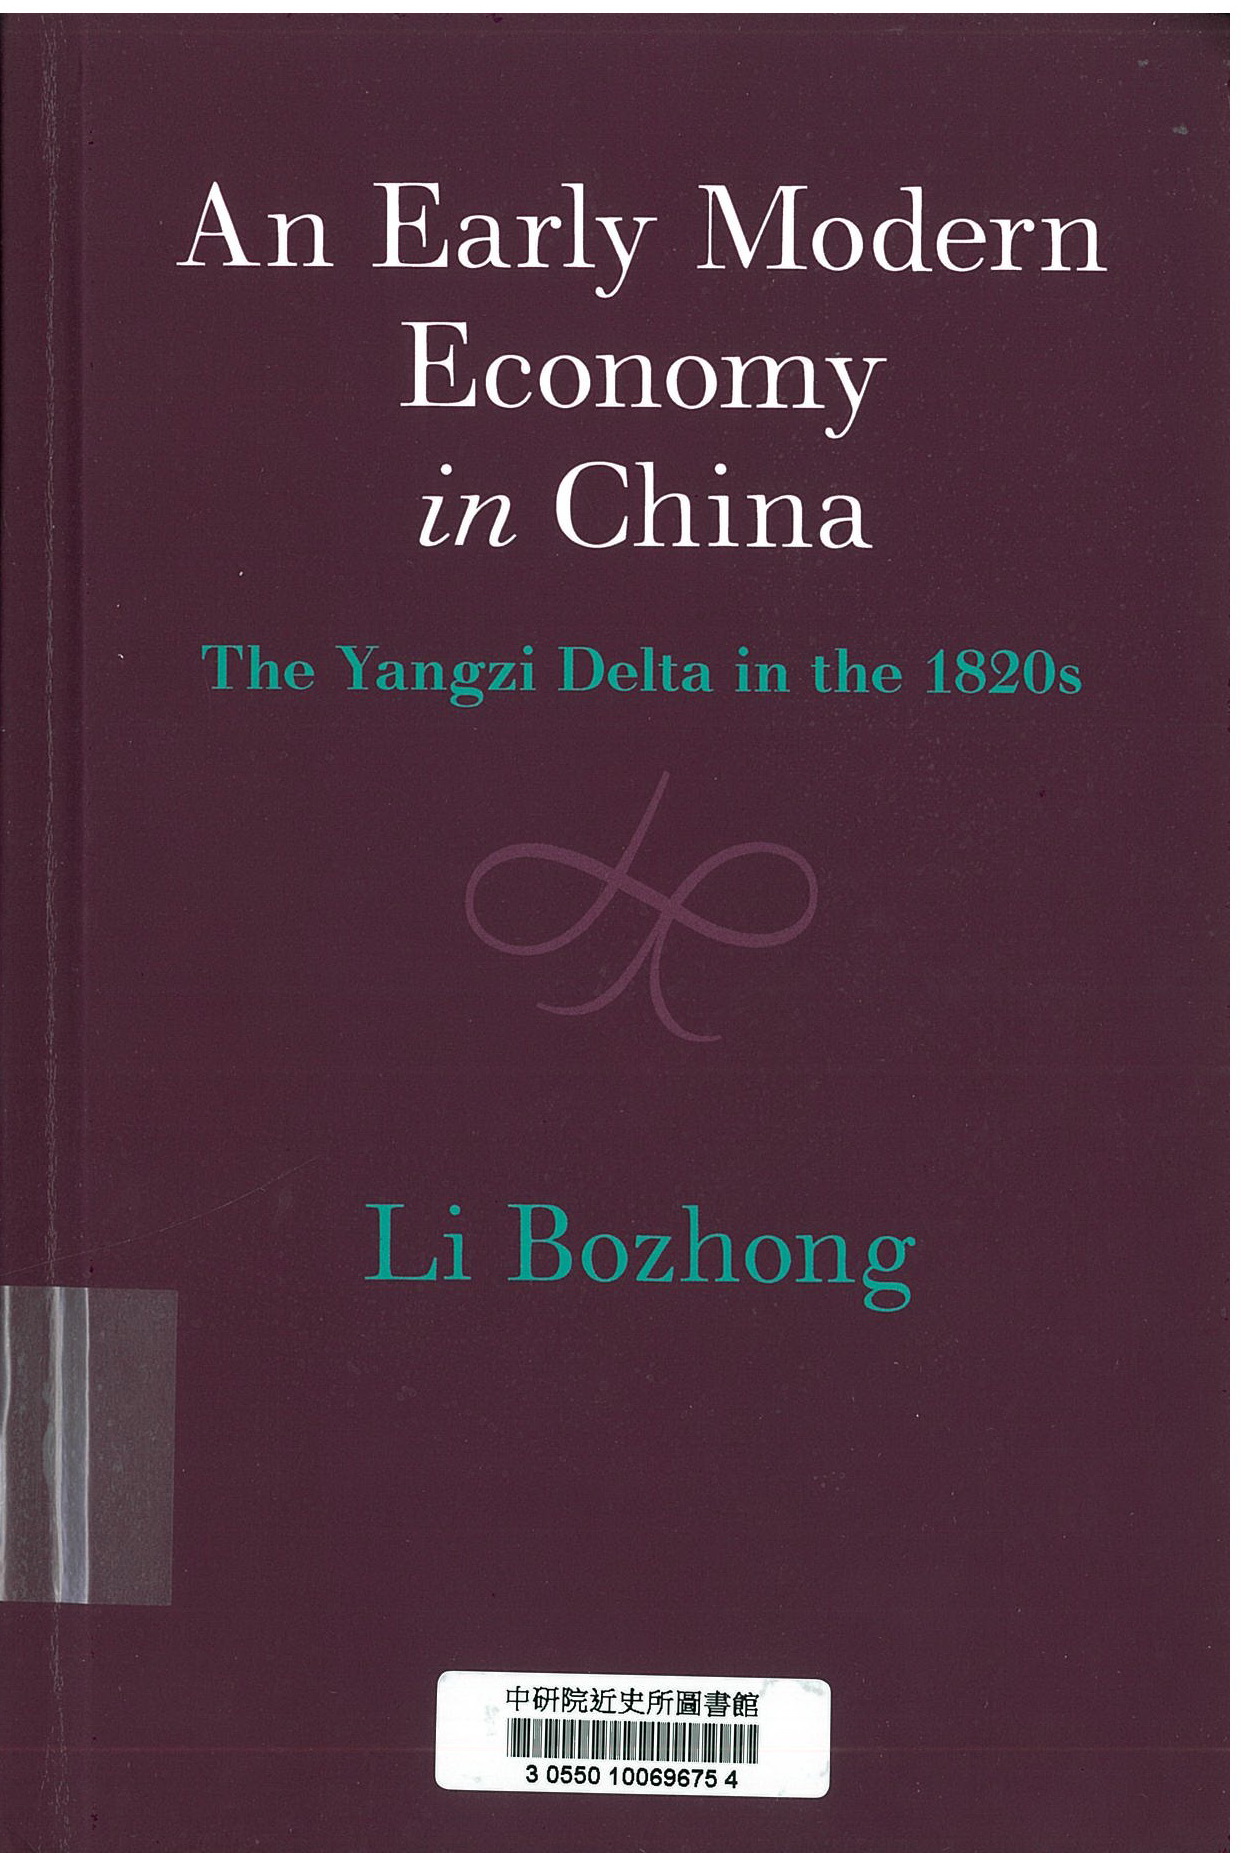 An early modern economy in China : the Yangzi Delta in the 1820s